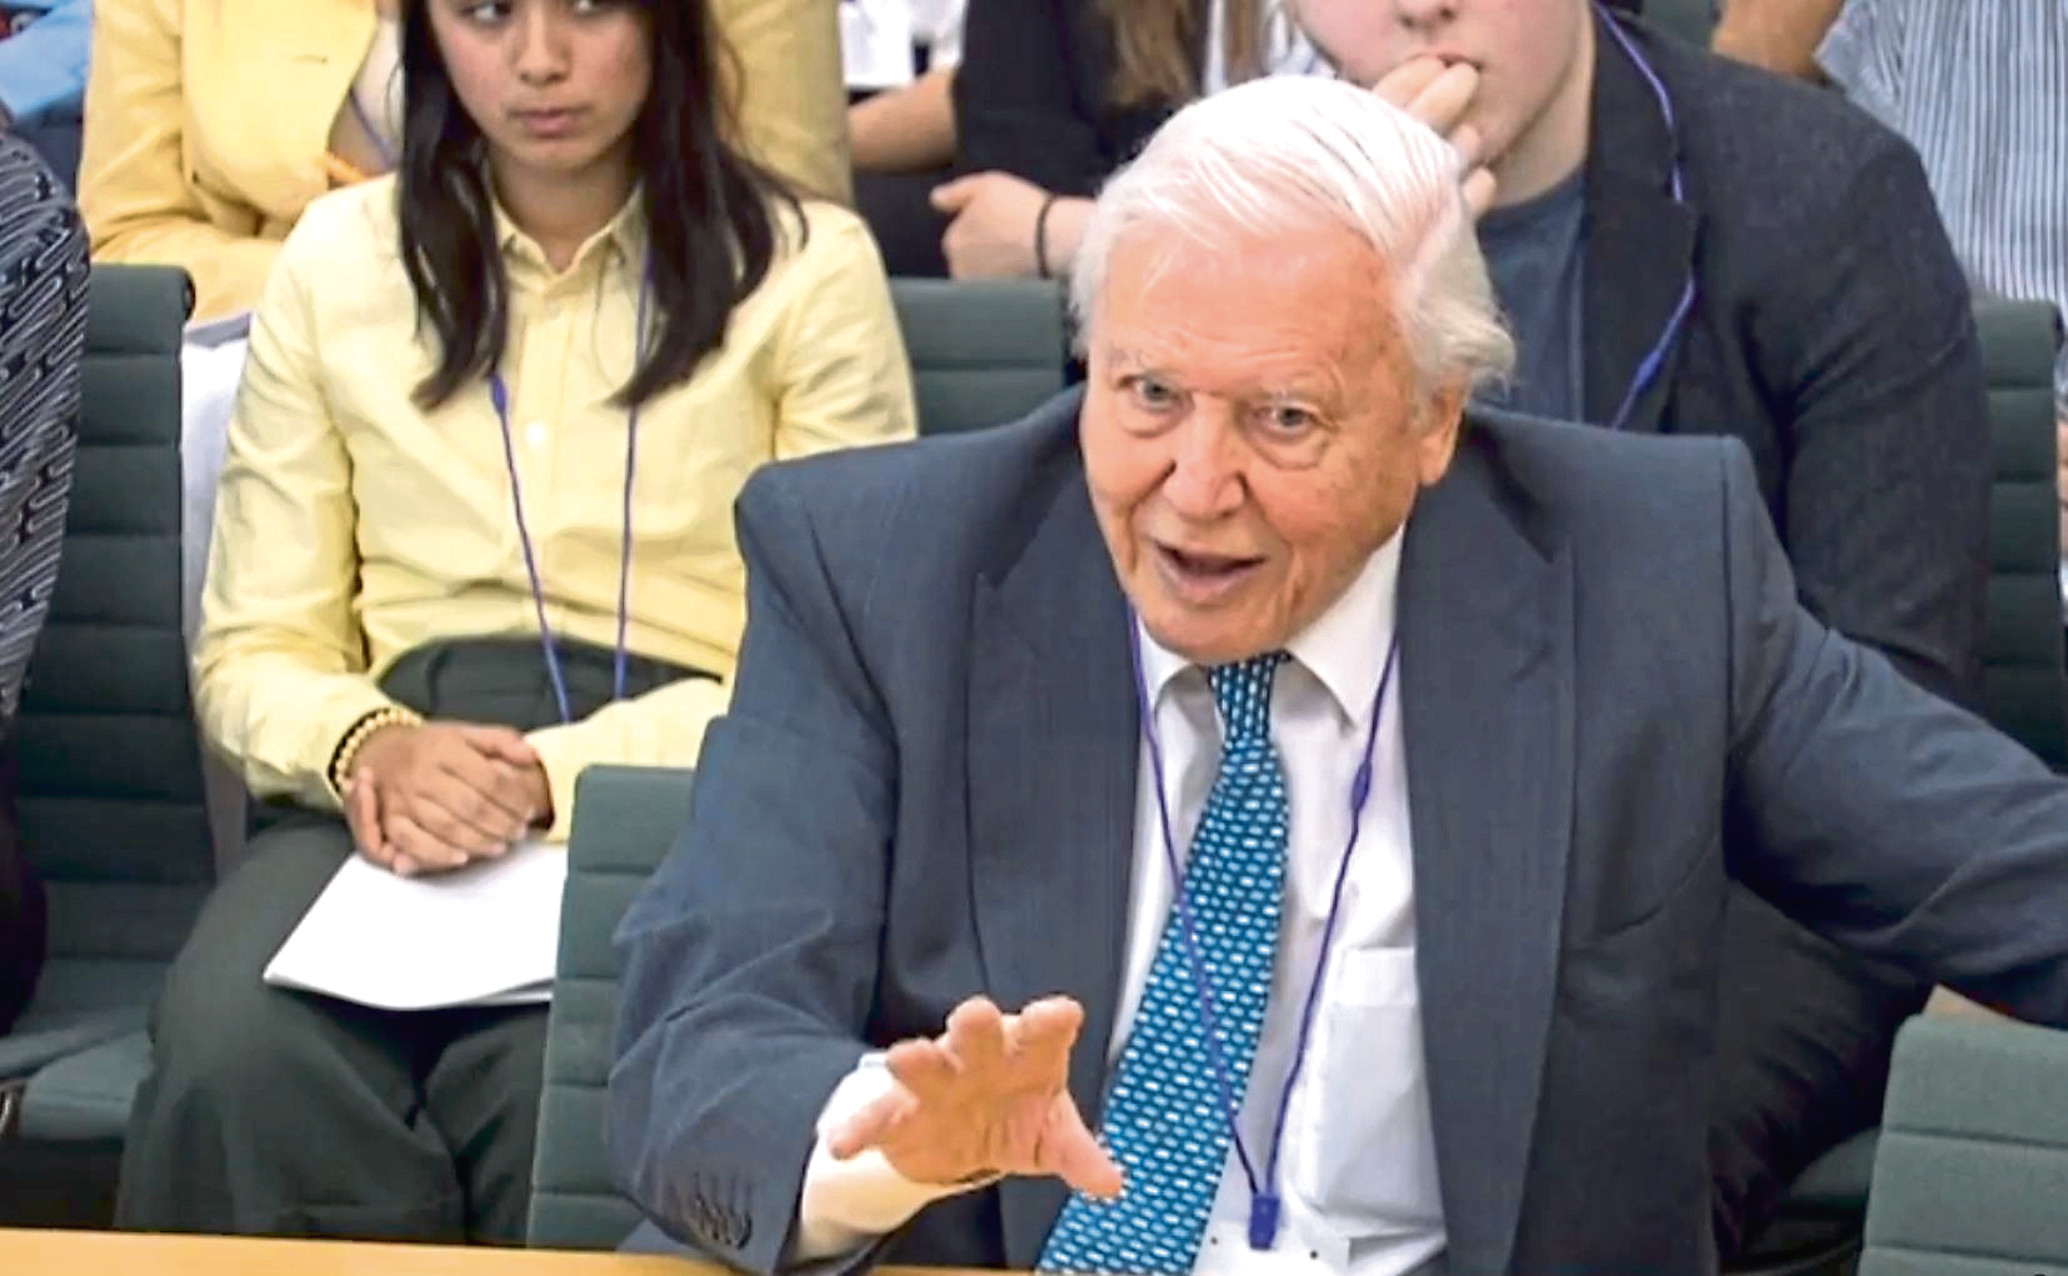 Naturalist Sir David Attenborough giving evidence to the House of Commons Business, Energy and Industrial Strategy Committee, 
PRESS ASSOCIATION Photo. Picture date: Tuesday July 9, 2019. Sir David is being questioned on a range of issues relating to climate change and the country's ambition to have net-zero emissions by 2050. See PA story ENVIRONMENT Attenborough. Photo credit should read: House of Commons/PA Wire